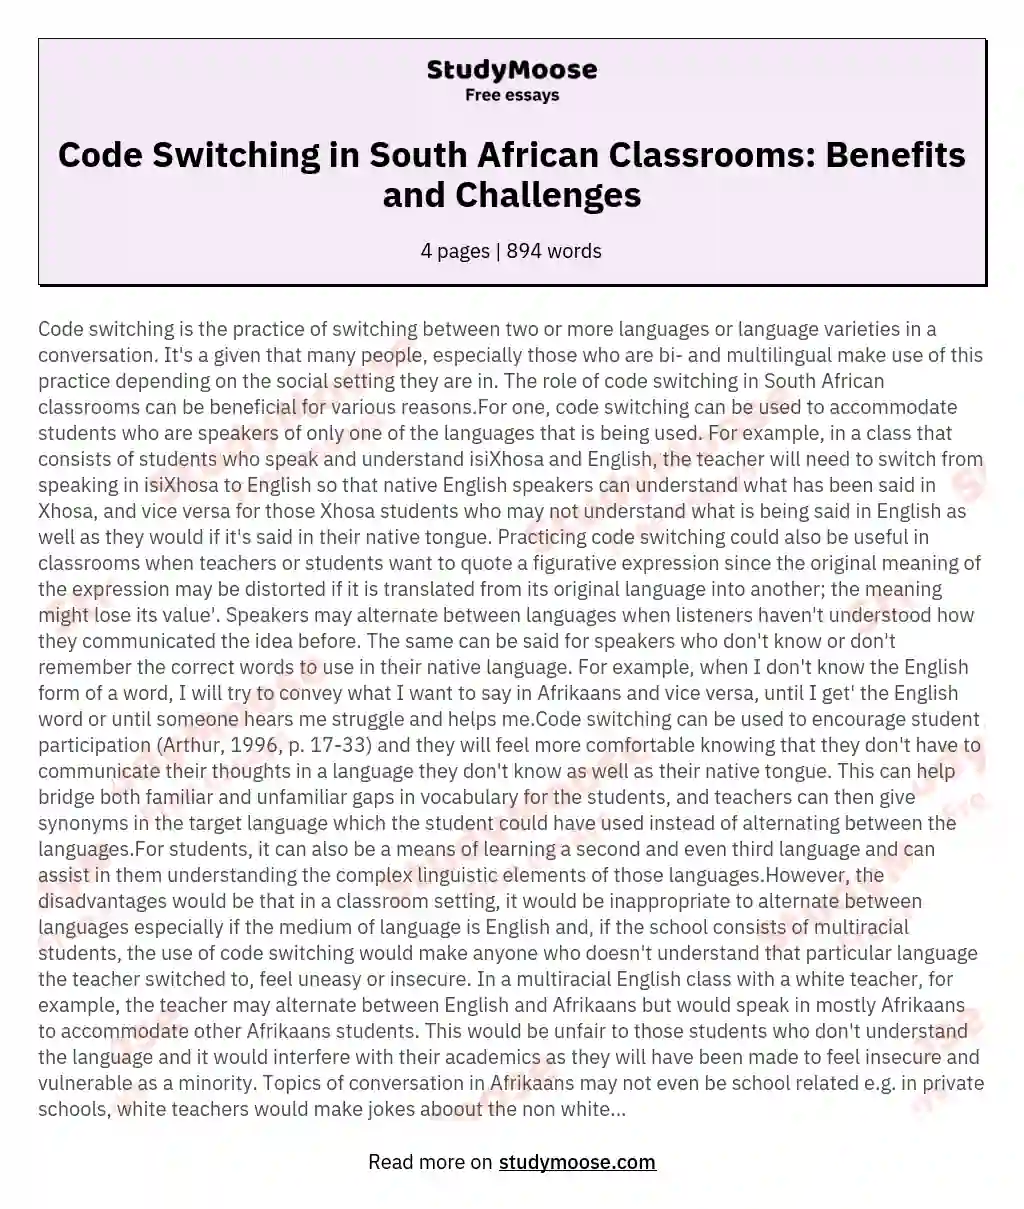 Code Switching in South African Classrooms: Benefits and Challenges essay